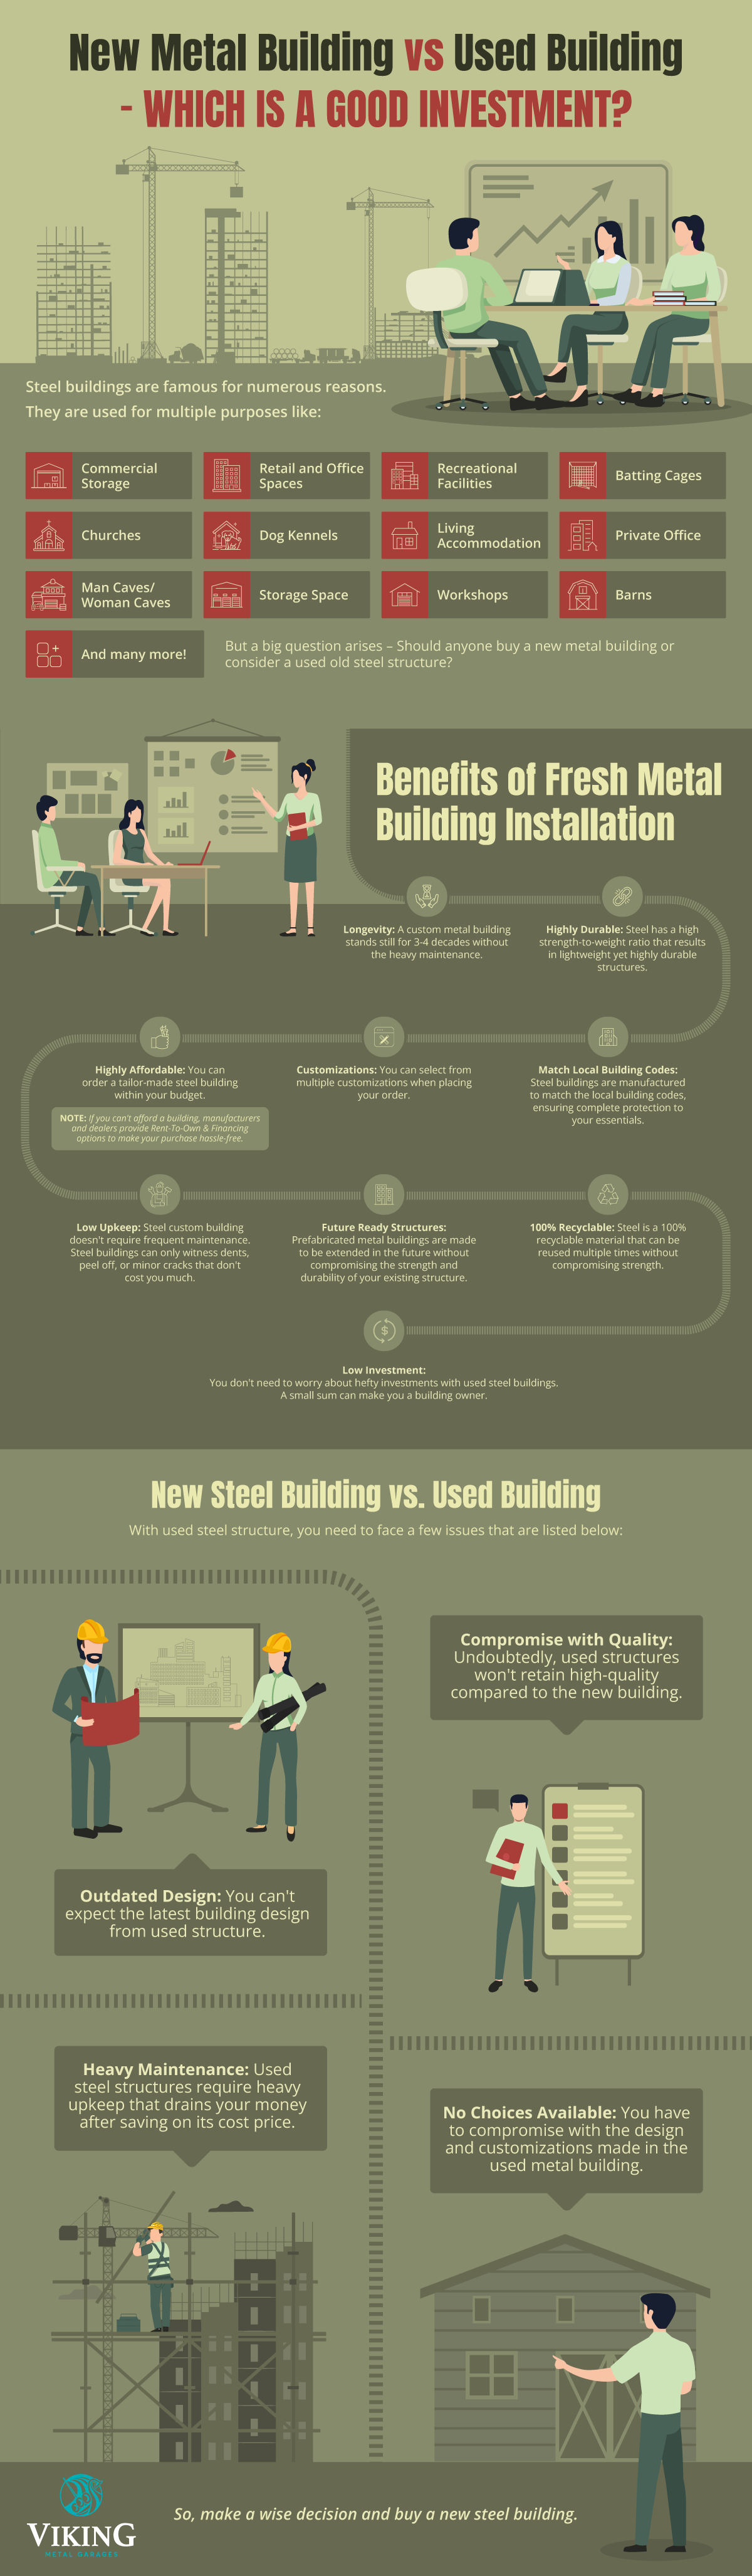 New Metal Buildings Vs Used Building-Which Is A Good Investment?